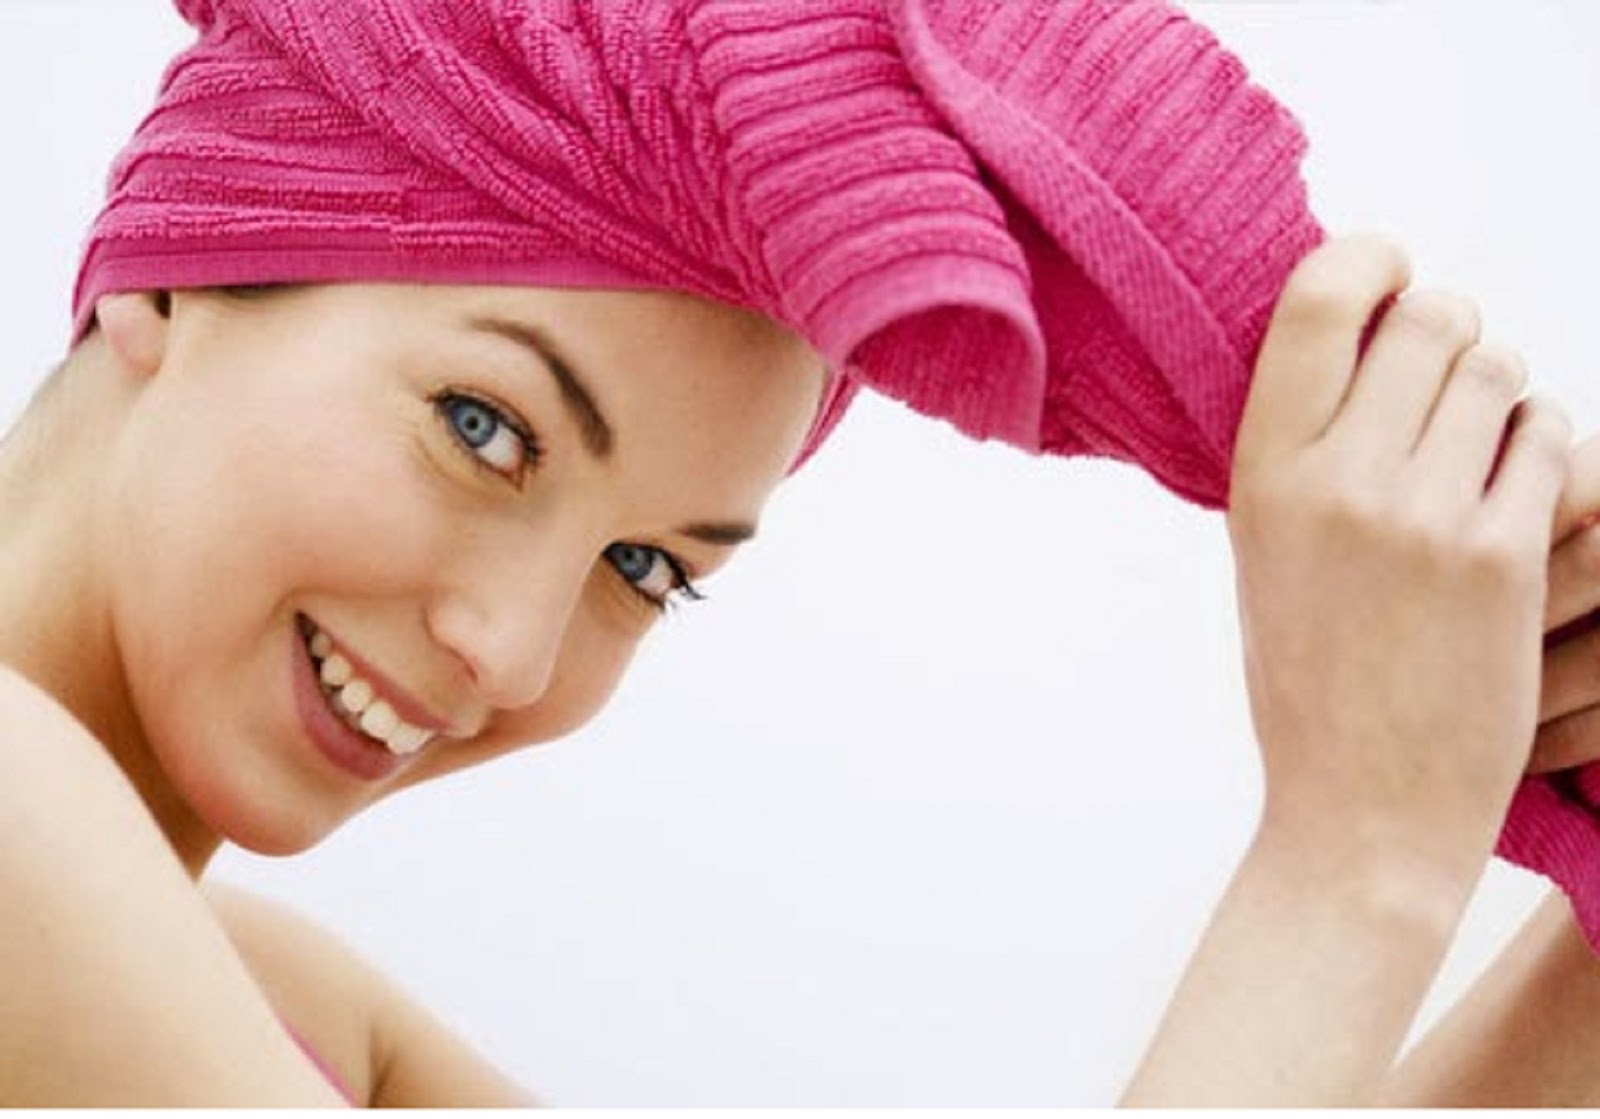 Hair drying techniques with a towel